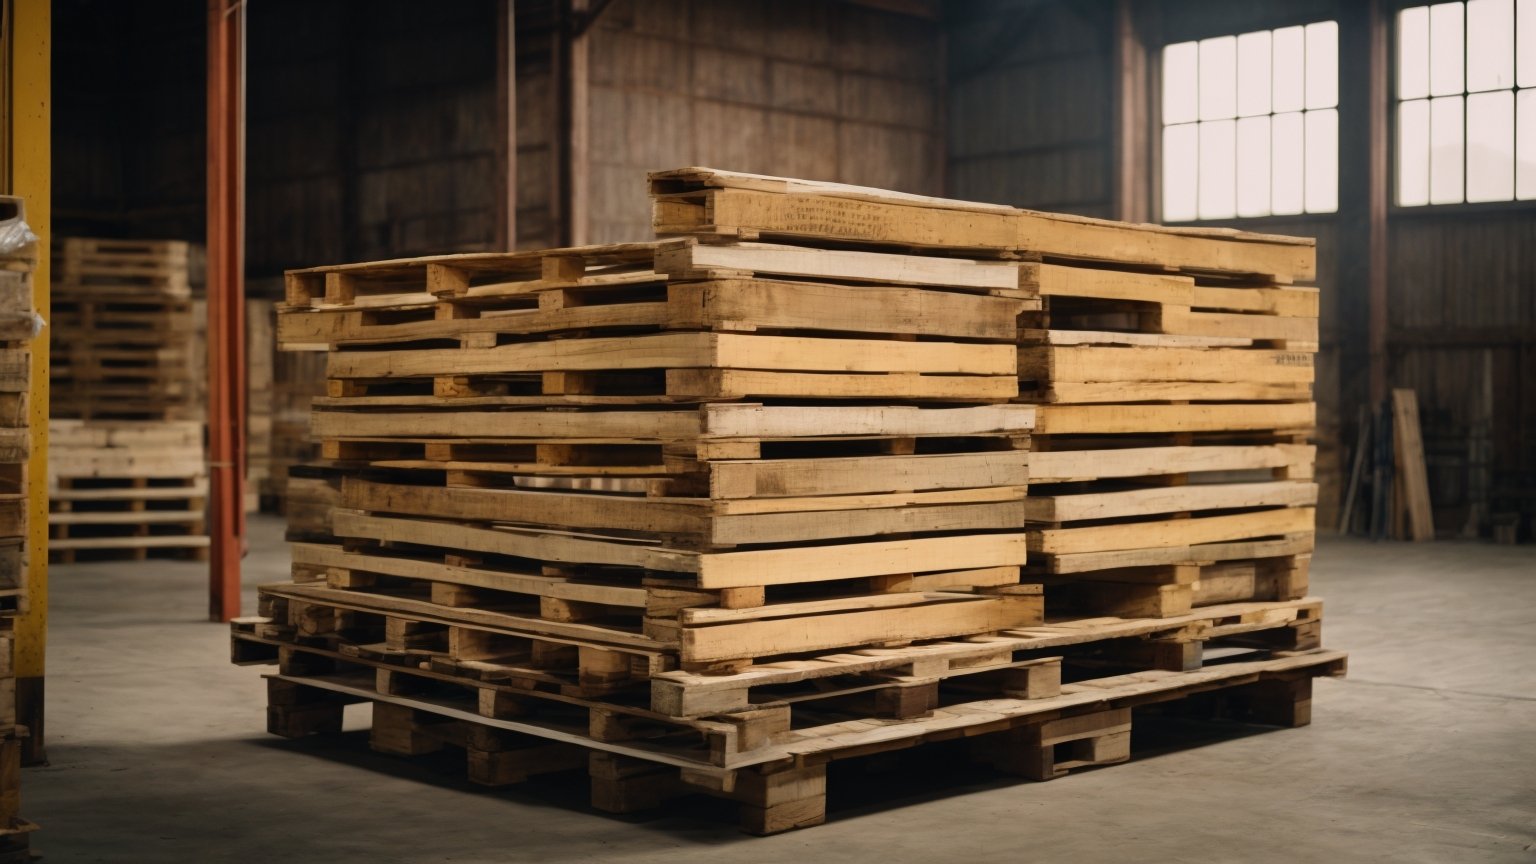 How Much Does a Wooden Pallet Weigh? Find Out Here!